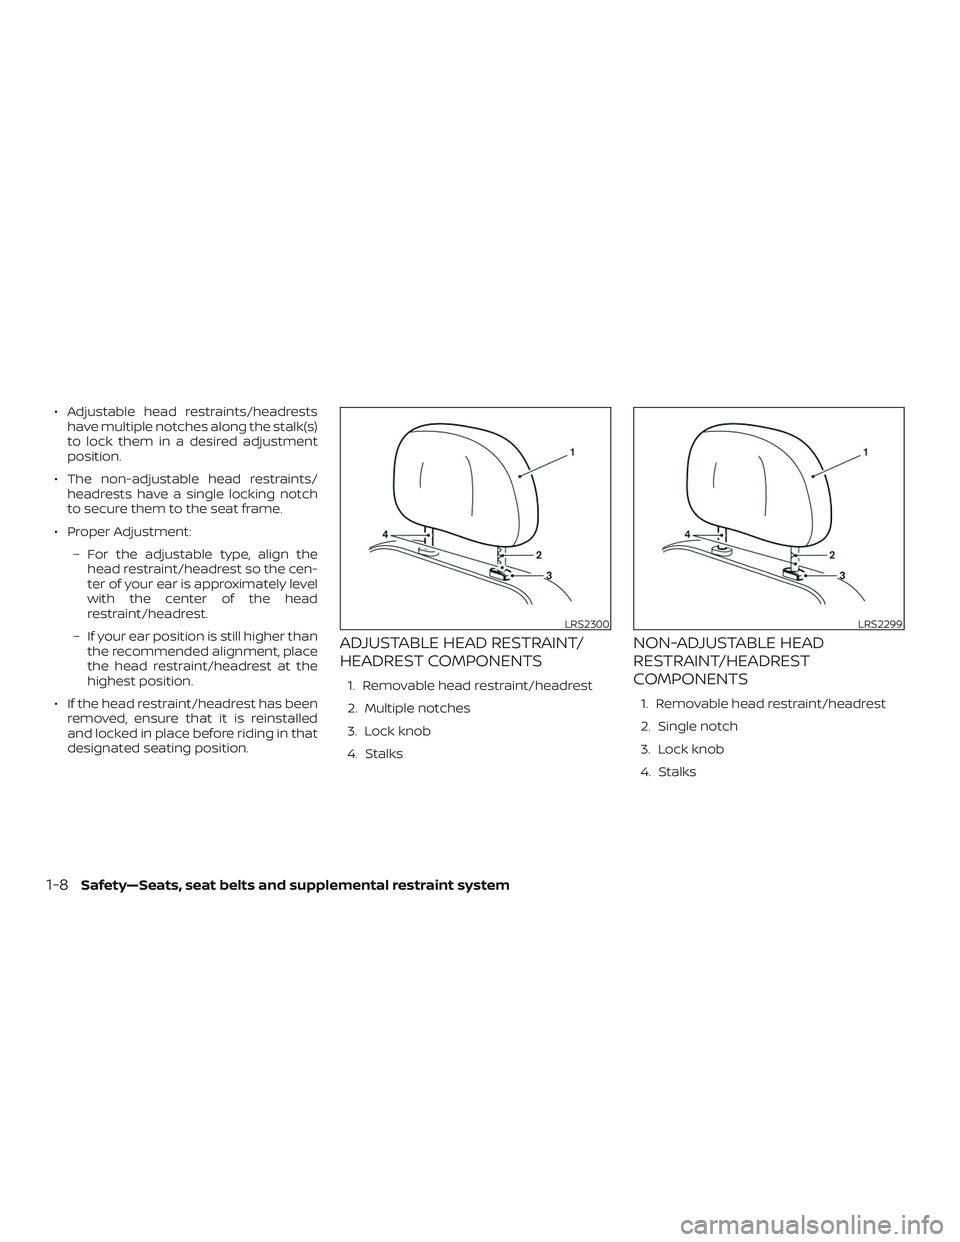 NISSAN MAXIMA 2020  Owner´s Manual ∙ Adjustable head restraints/headrestshave multiple notches along the stalk(s)
to lock them in a desired adjustment
position.
∙ The non-adjustable head restraints/ headrests have a single locking 